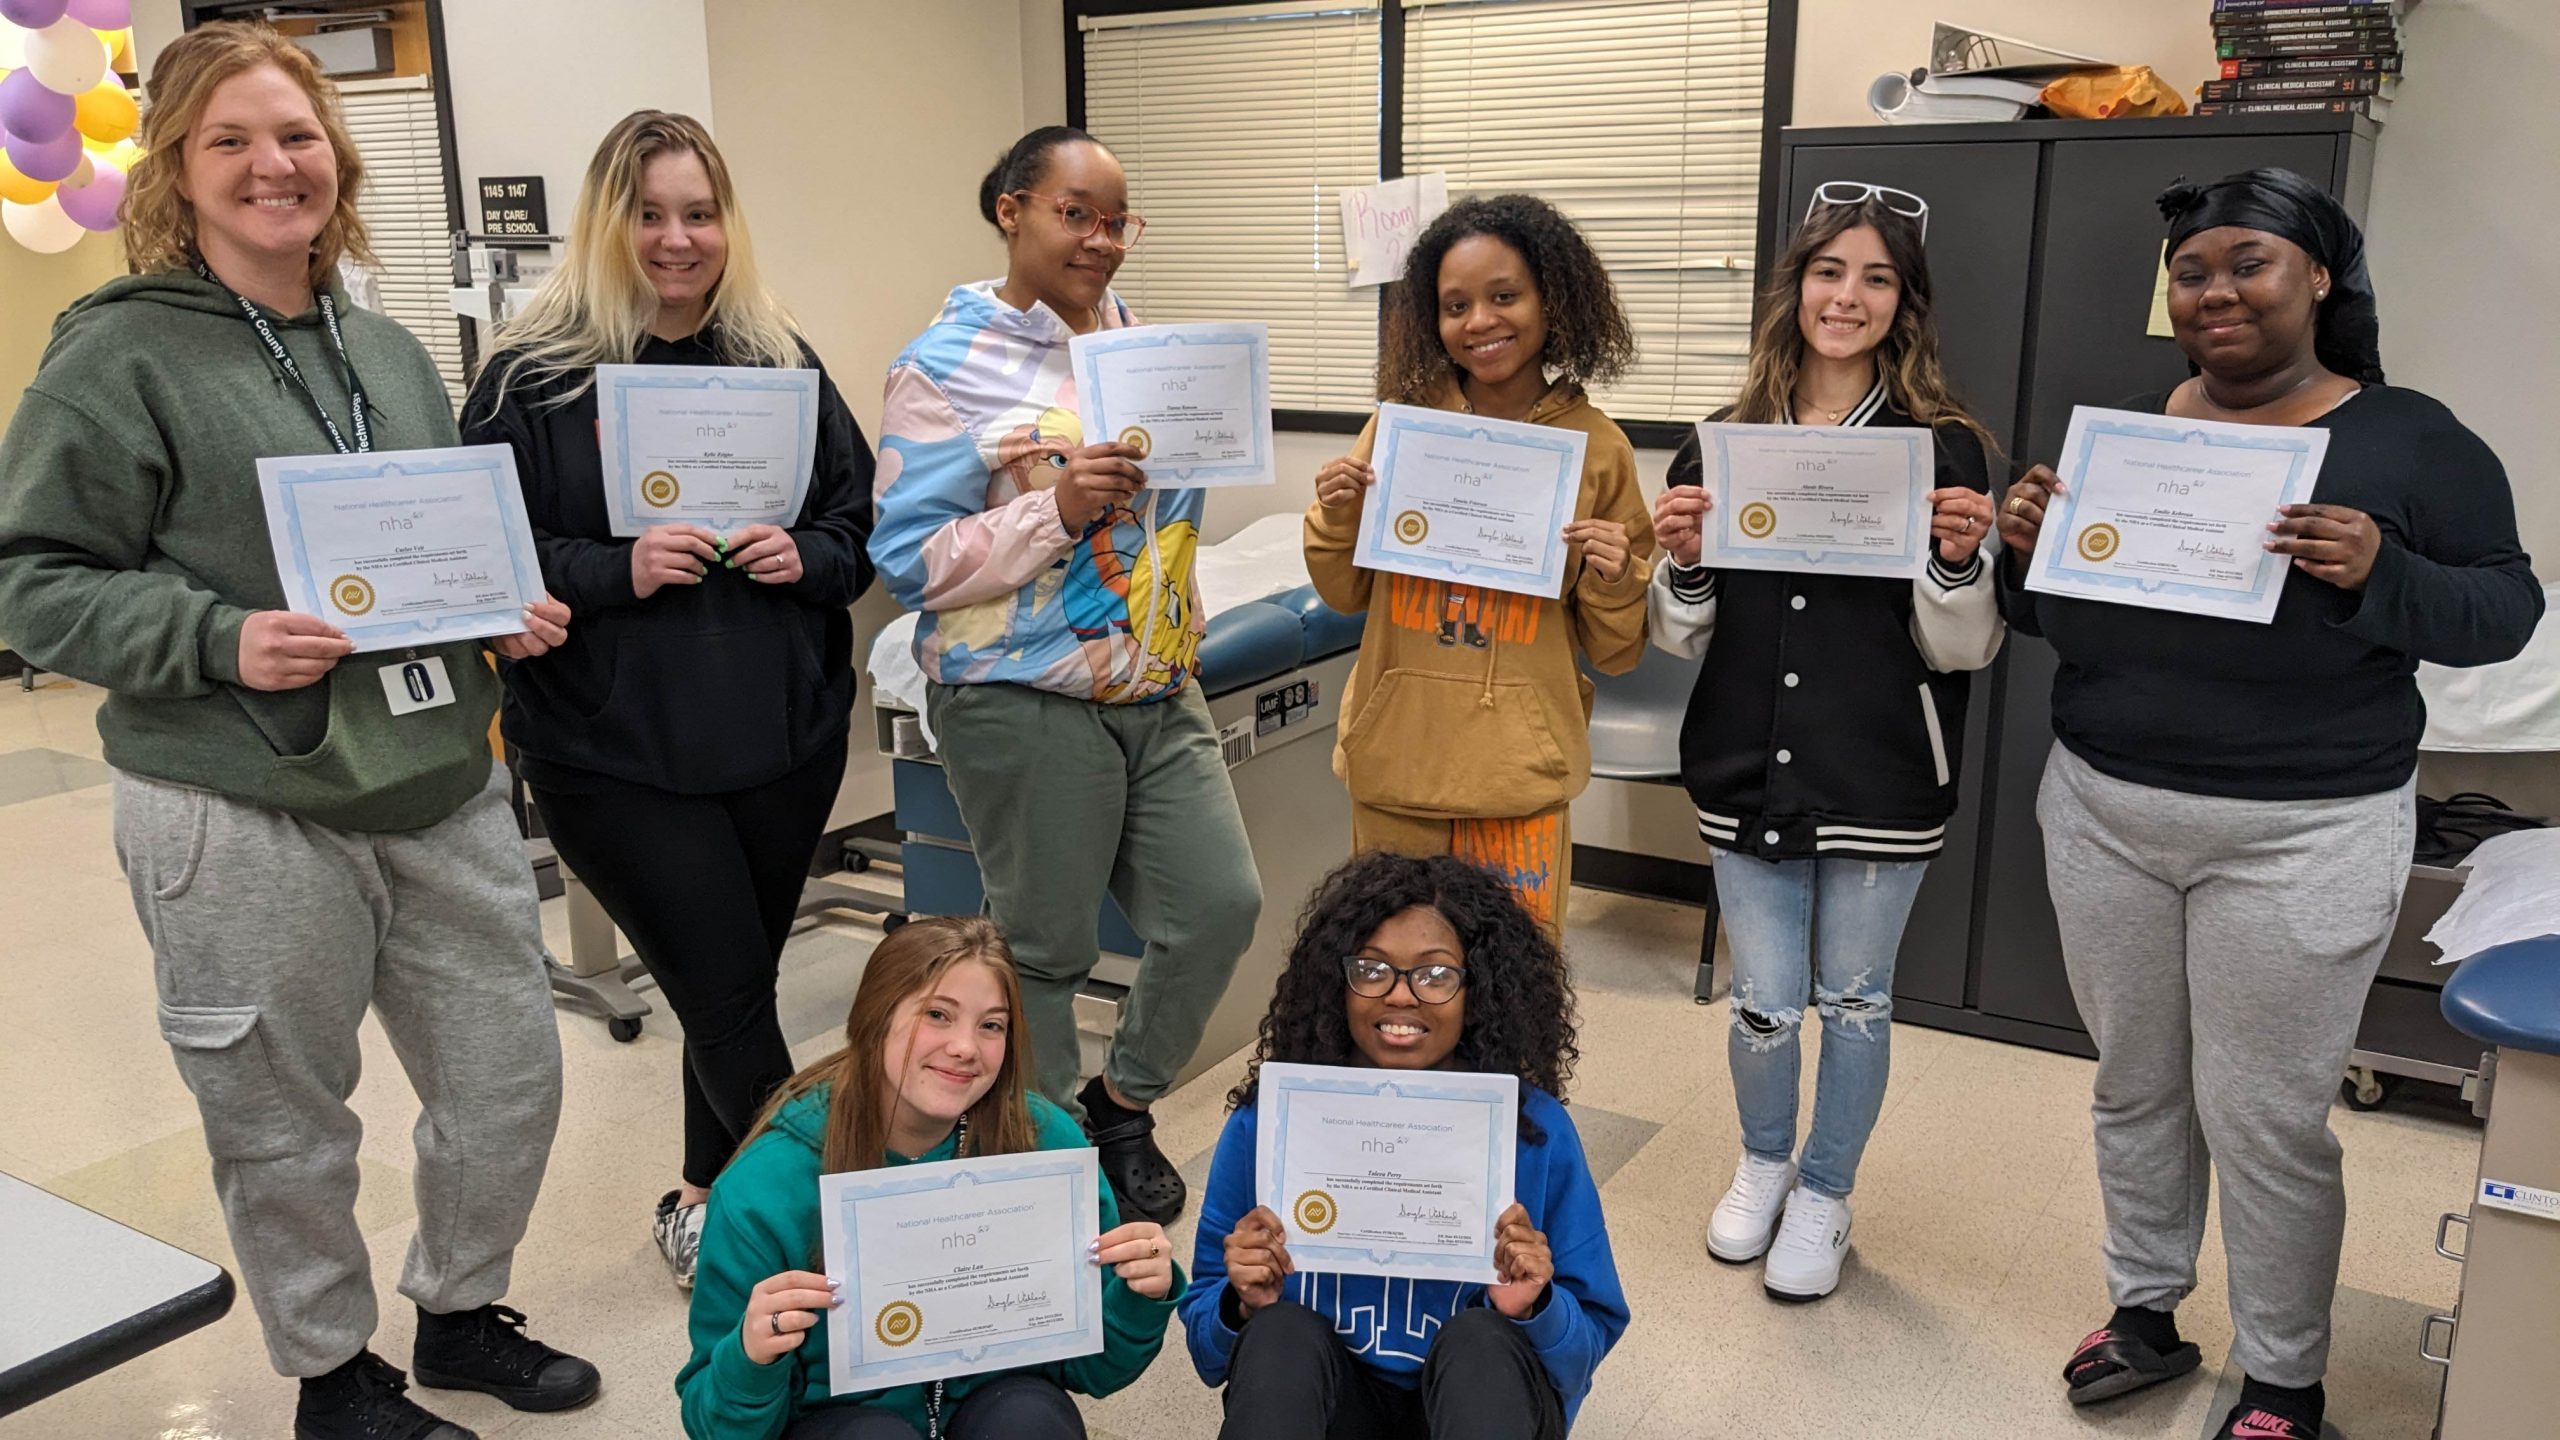 Congratulations to our Certified Medical Assistants!